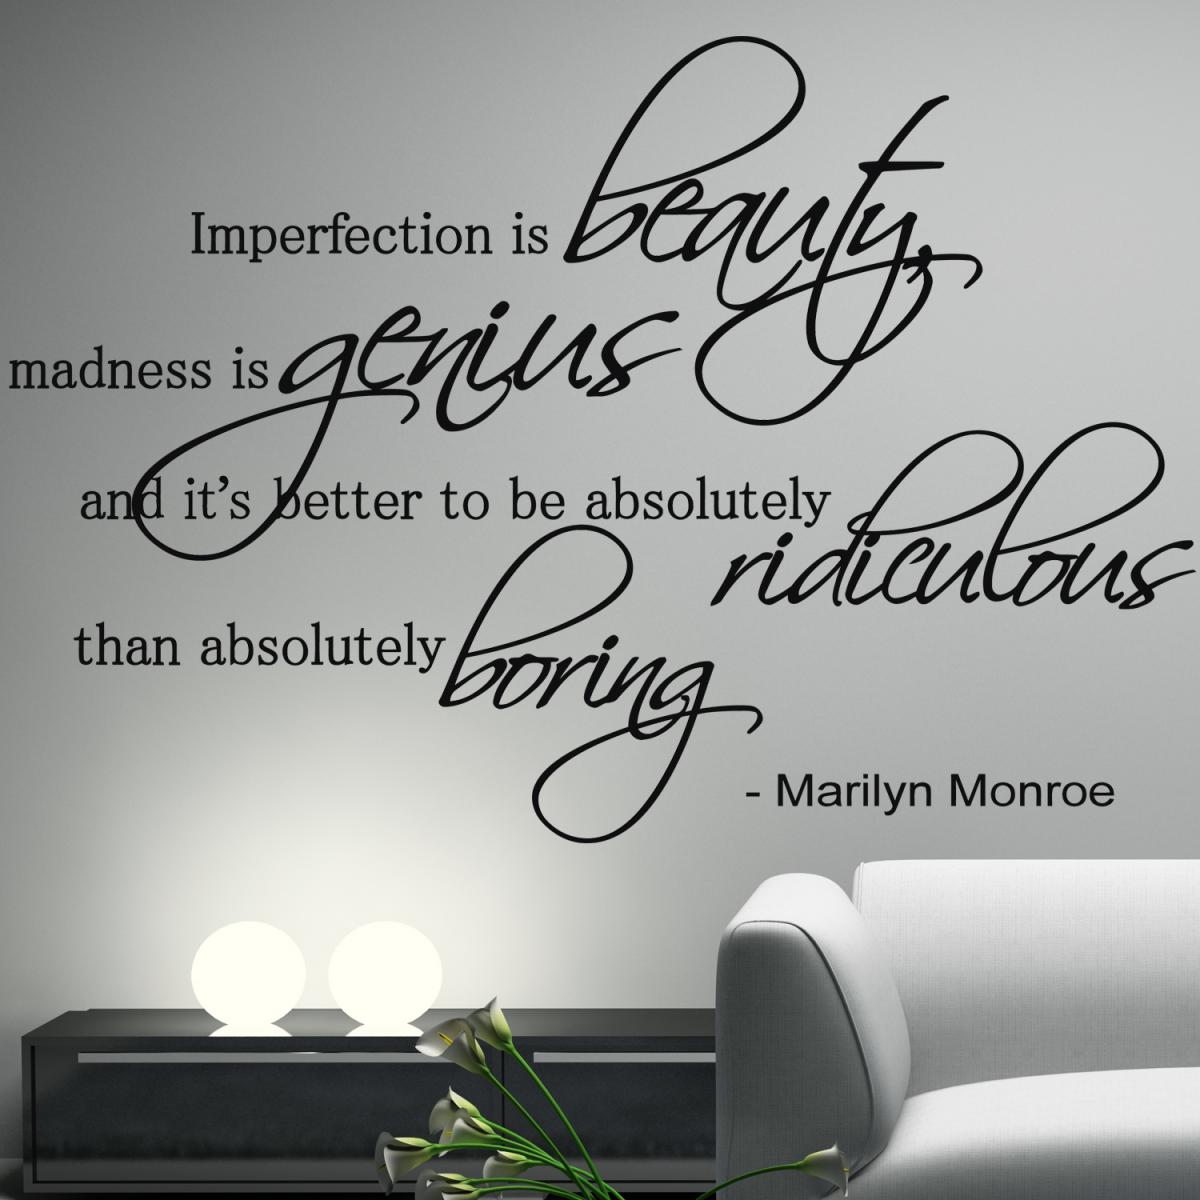 Marilyn Monroe Wall Decal Vinyl Sticker Quote Art Decor Imperfection Is Beauty